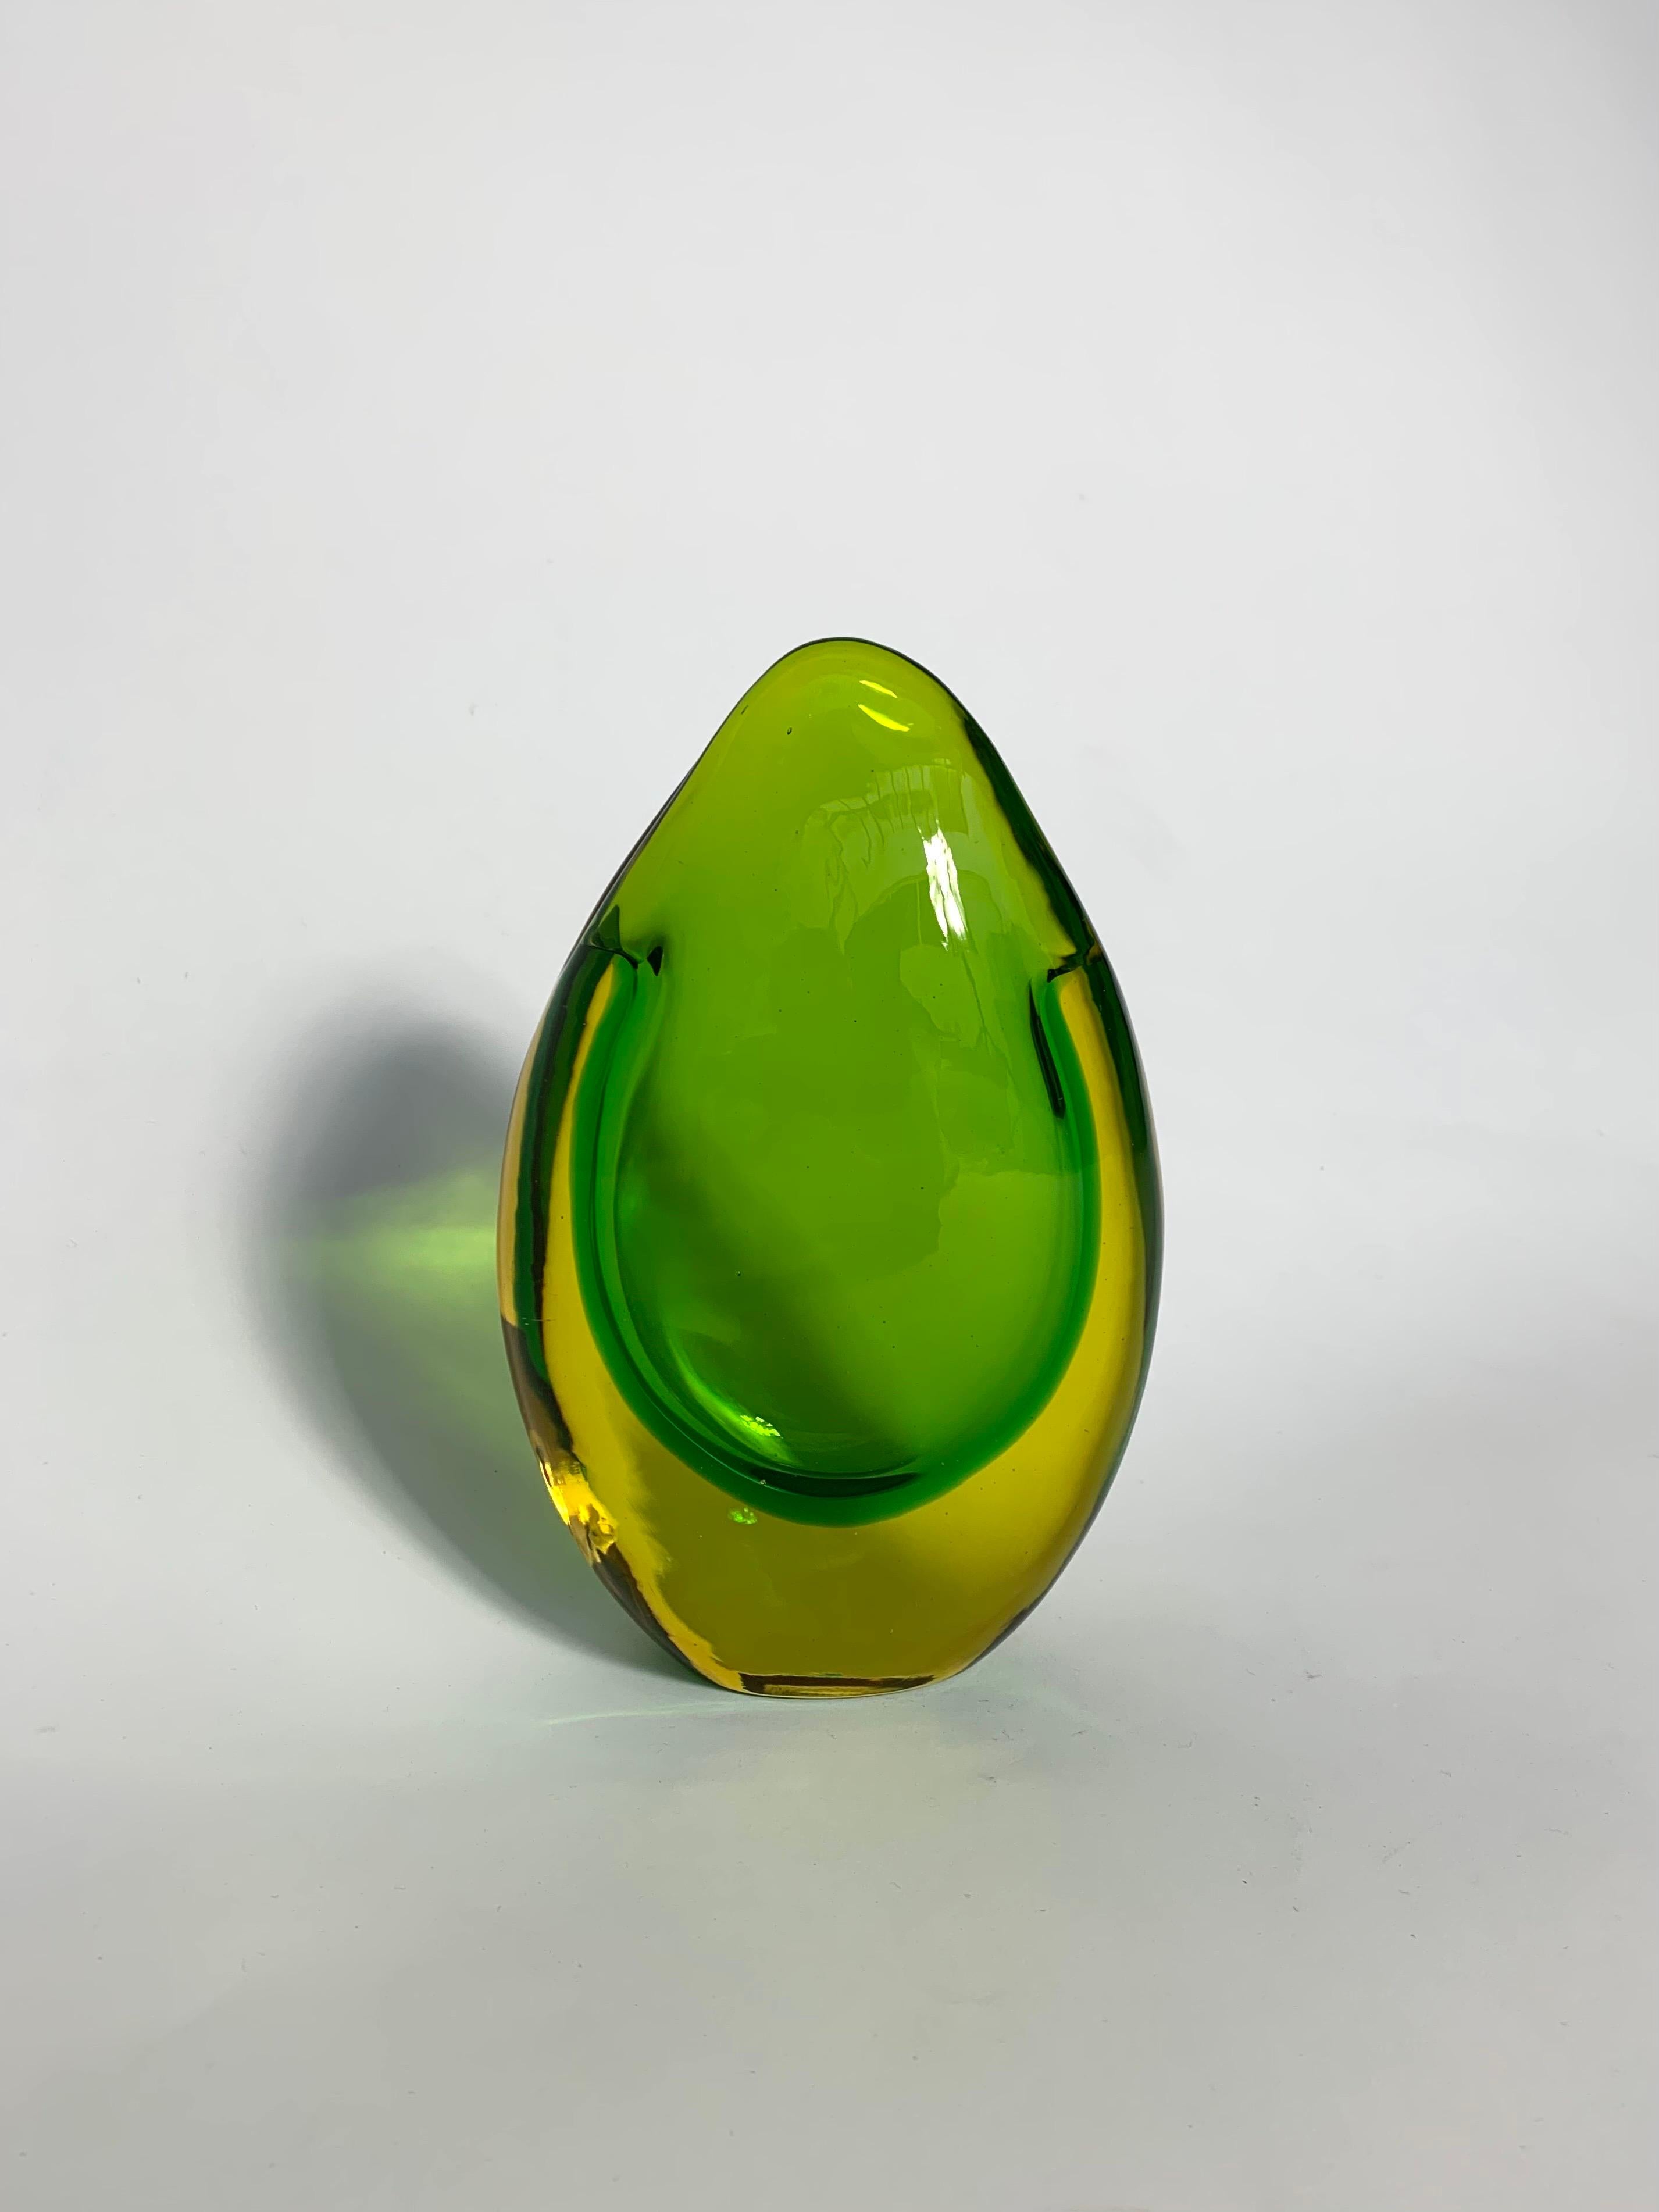 Rare ‚Valva‘ vase designed by Flavio Poli for Seguso Vetri d‘Arte in the early 1950s. Sommerso glass in verde-giallo (green-yellow), mouth-blown and hand-shaped in Murano. 

Height: 20.5 cm
Width: 13 cm
Depth: 8 cm